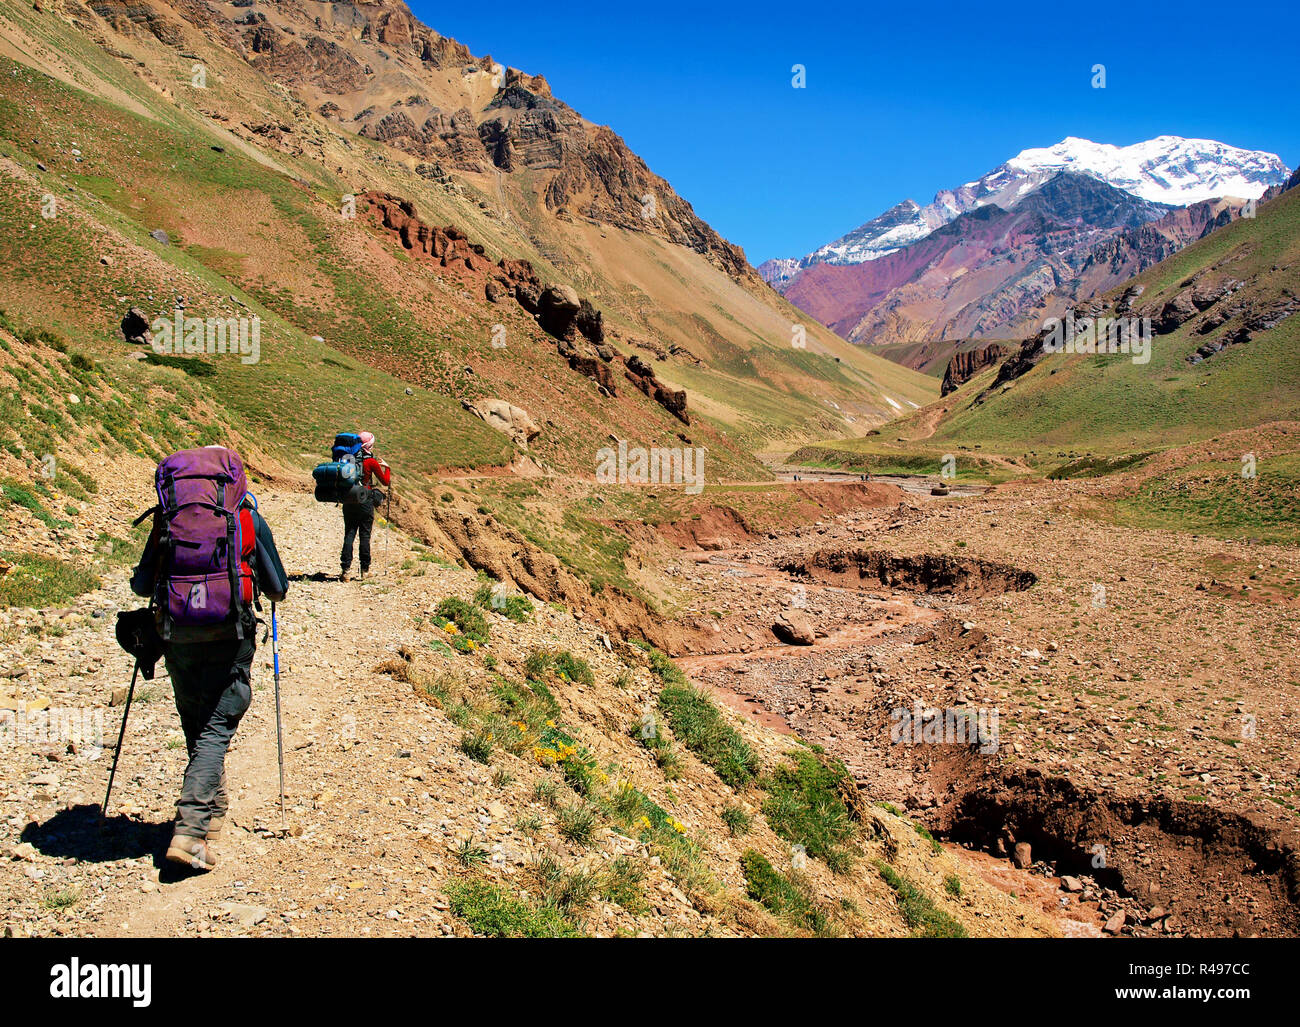 Hikers on their way to Aconcagua as seen in the background, Aconcagua National Park, Argentina, South America Stock Photo